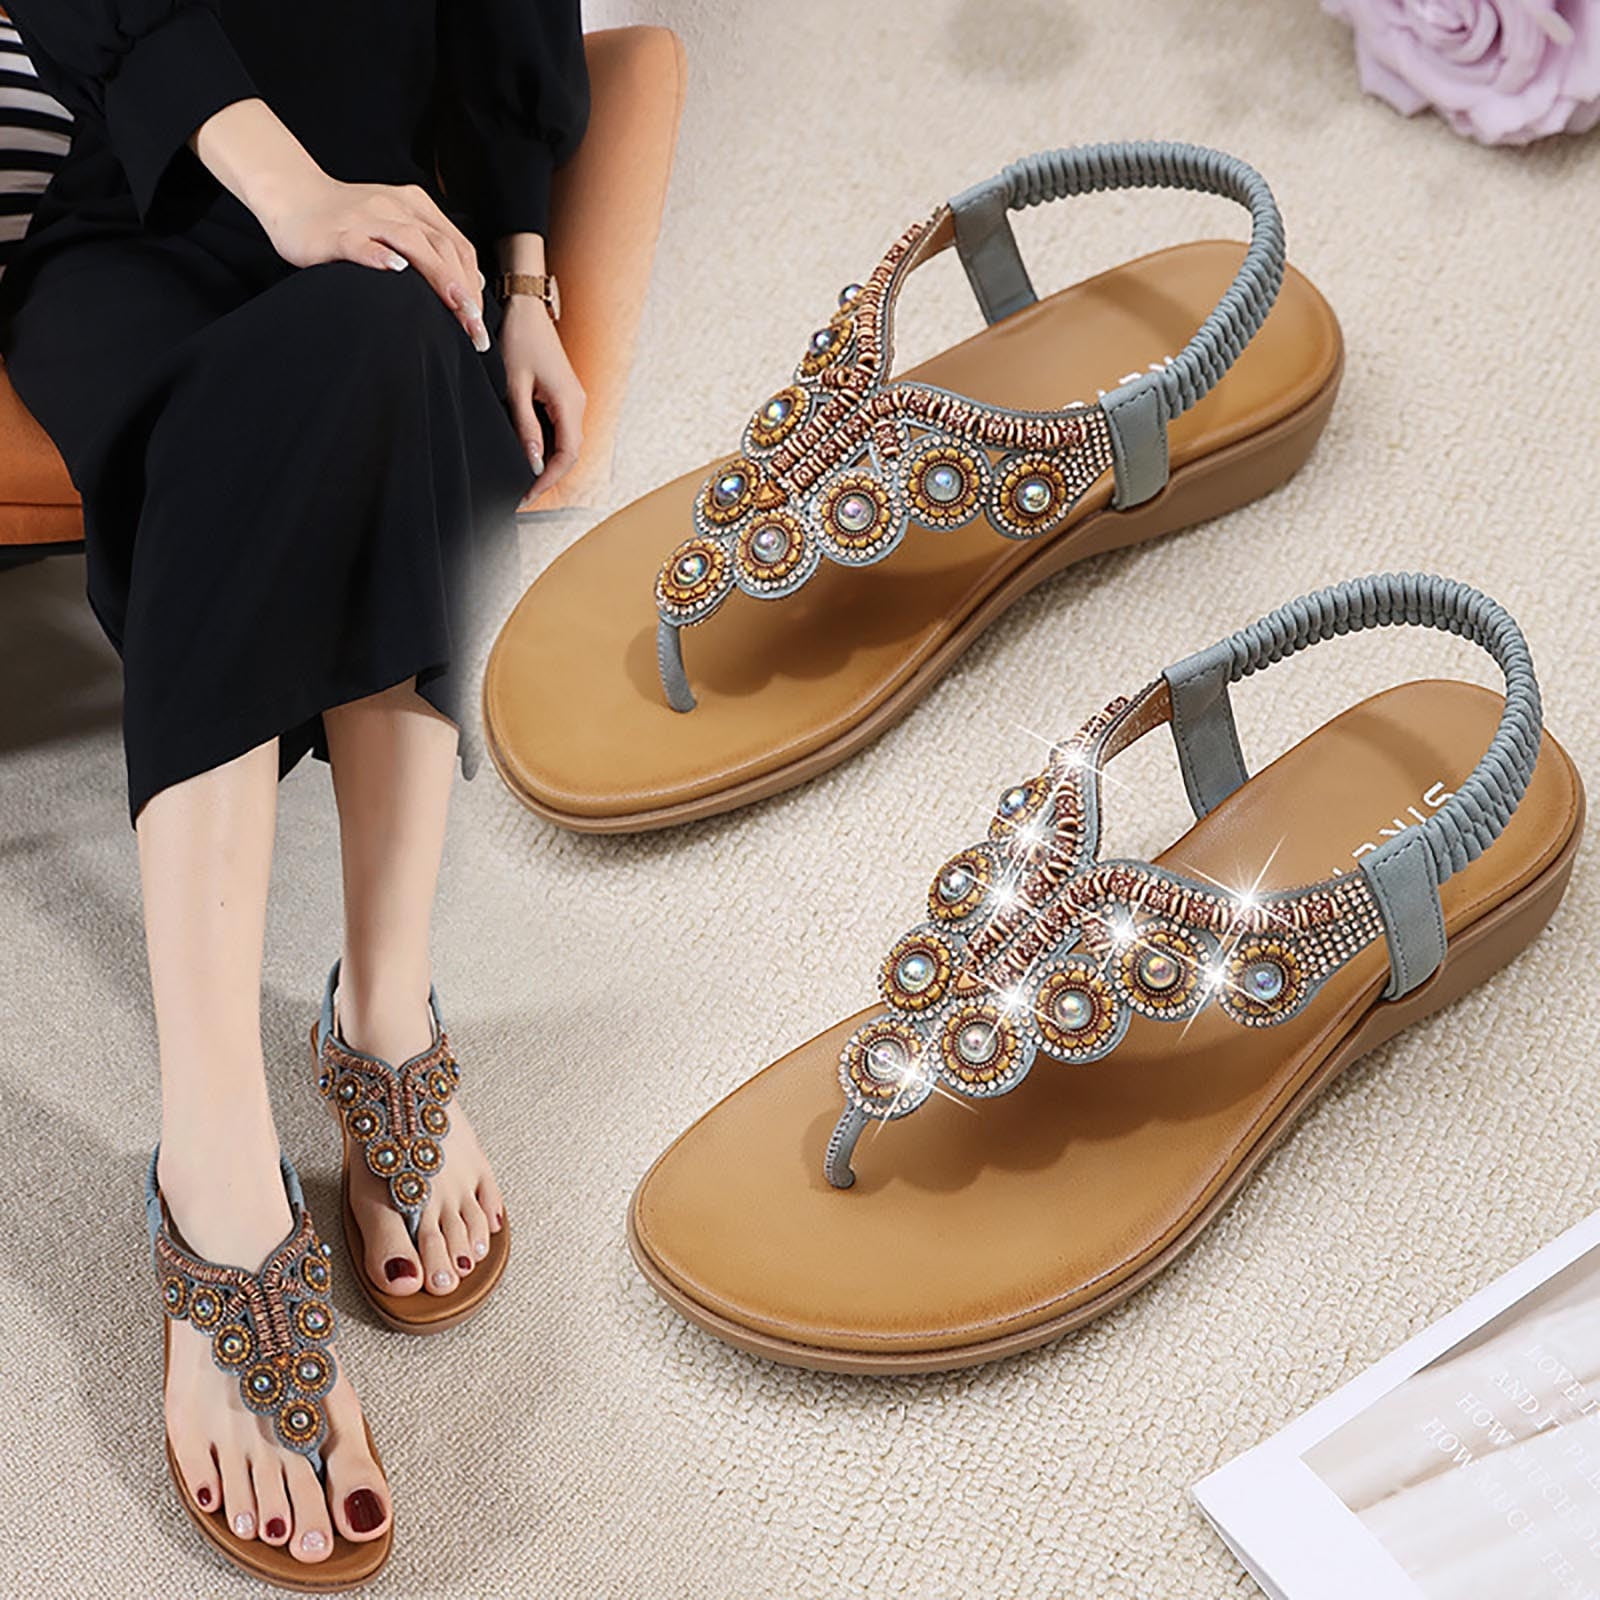 Woman Shoe Sandals,AXXD Women's Shoes Summer Ladies Fish Mouth Sandals  Footwear Roman Slippers for Girls' Easter Outfits Black 4.5